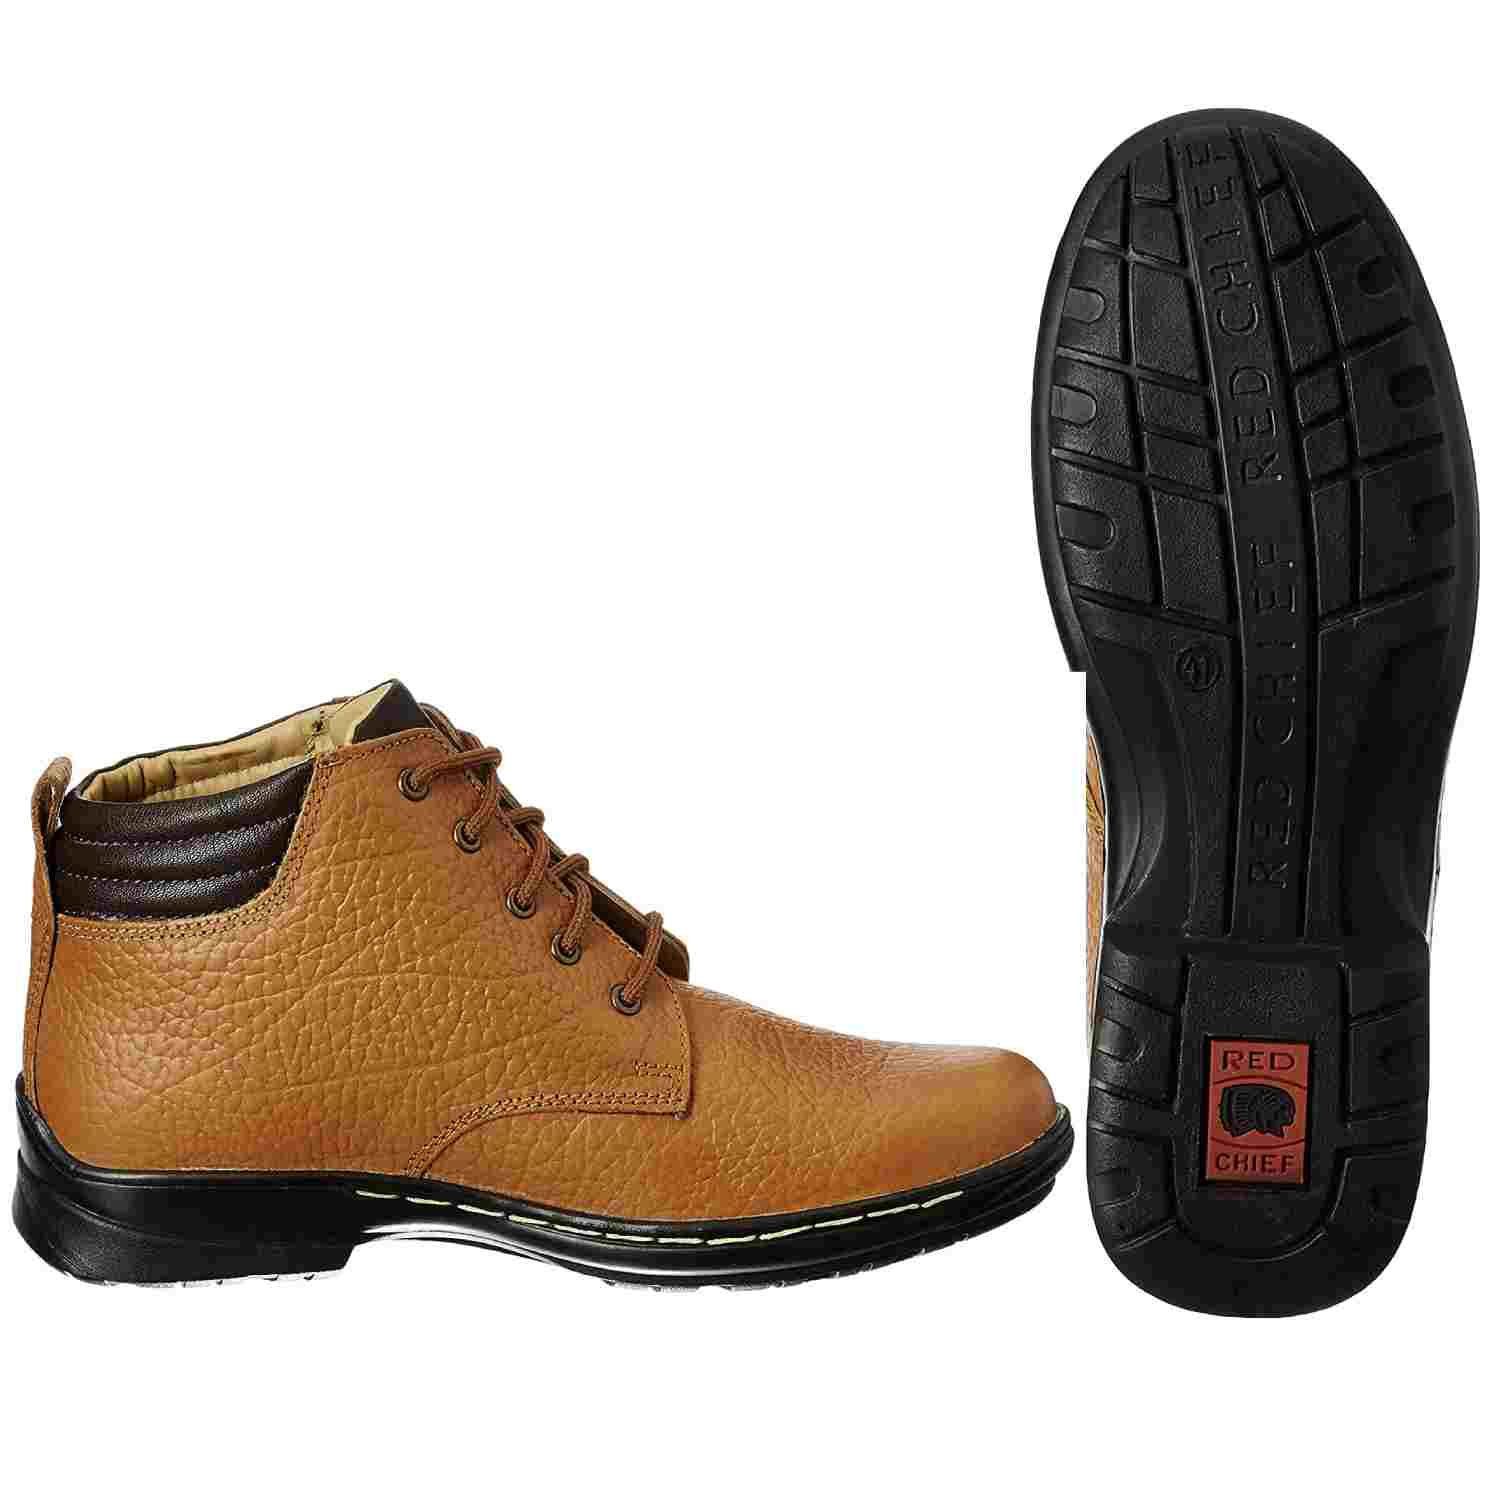 Redchief Men's Leather Boots